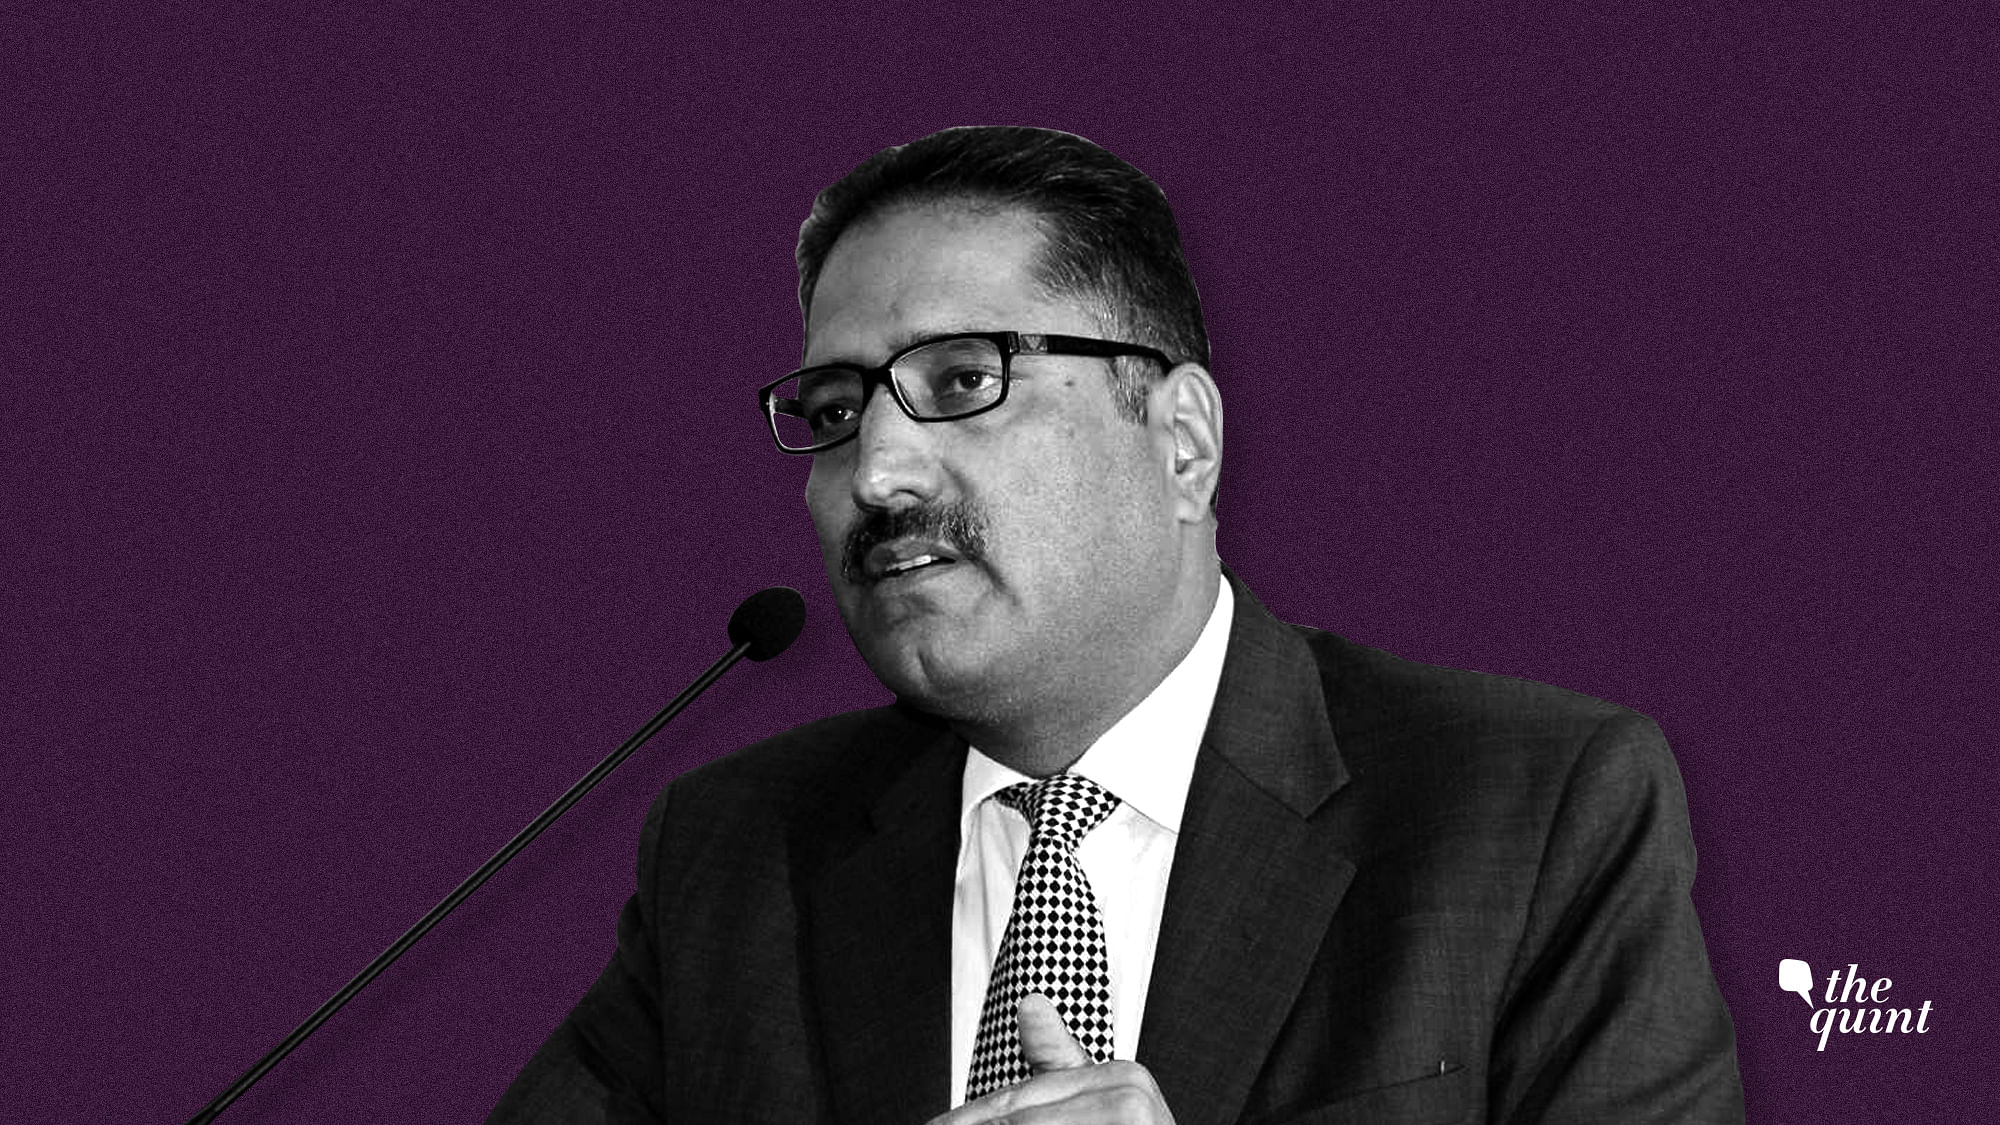  Senior journalist and editor of Rising Kashmir newspaper, Shujaat Bukhari was shot dead by unknown assailants at the Press Enclave in Jammu and Kashmir’s Srinagar.